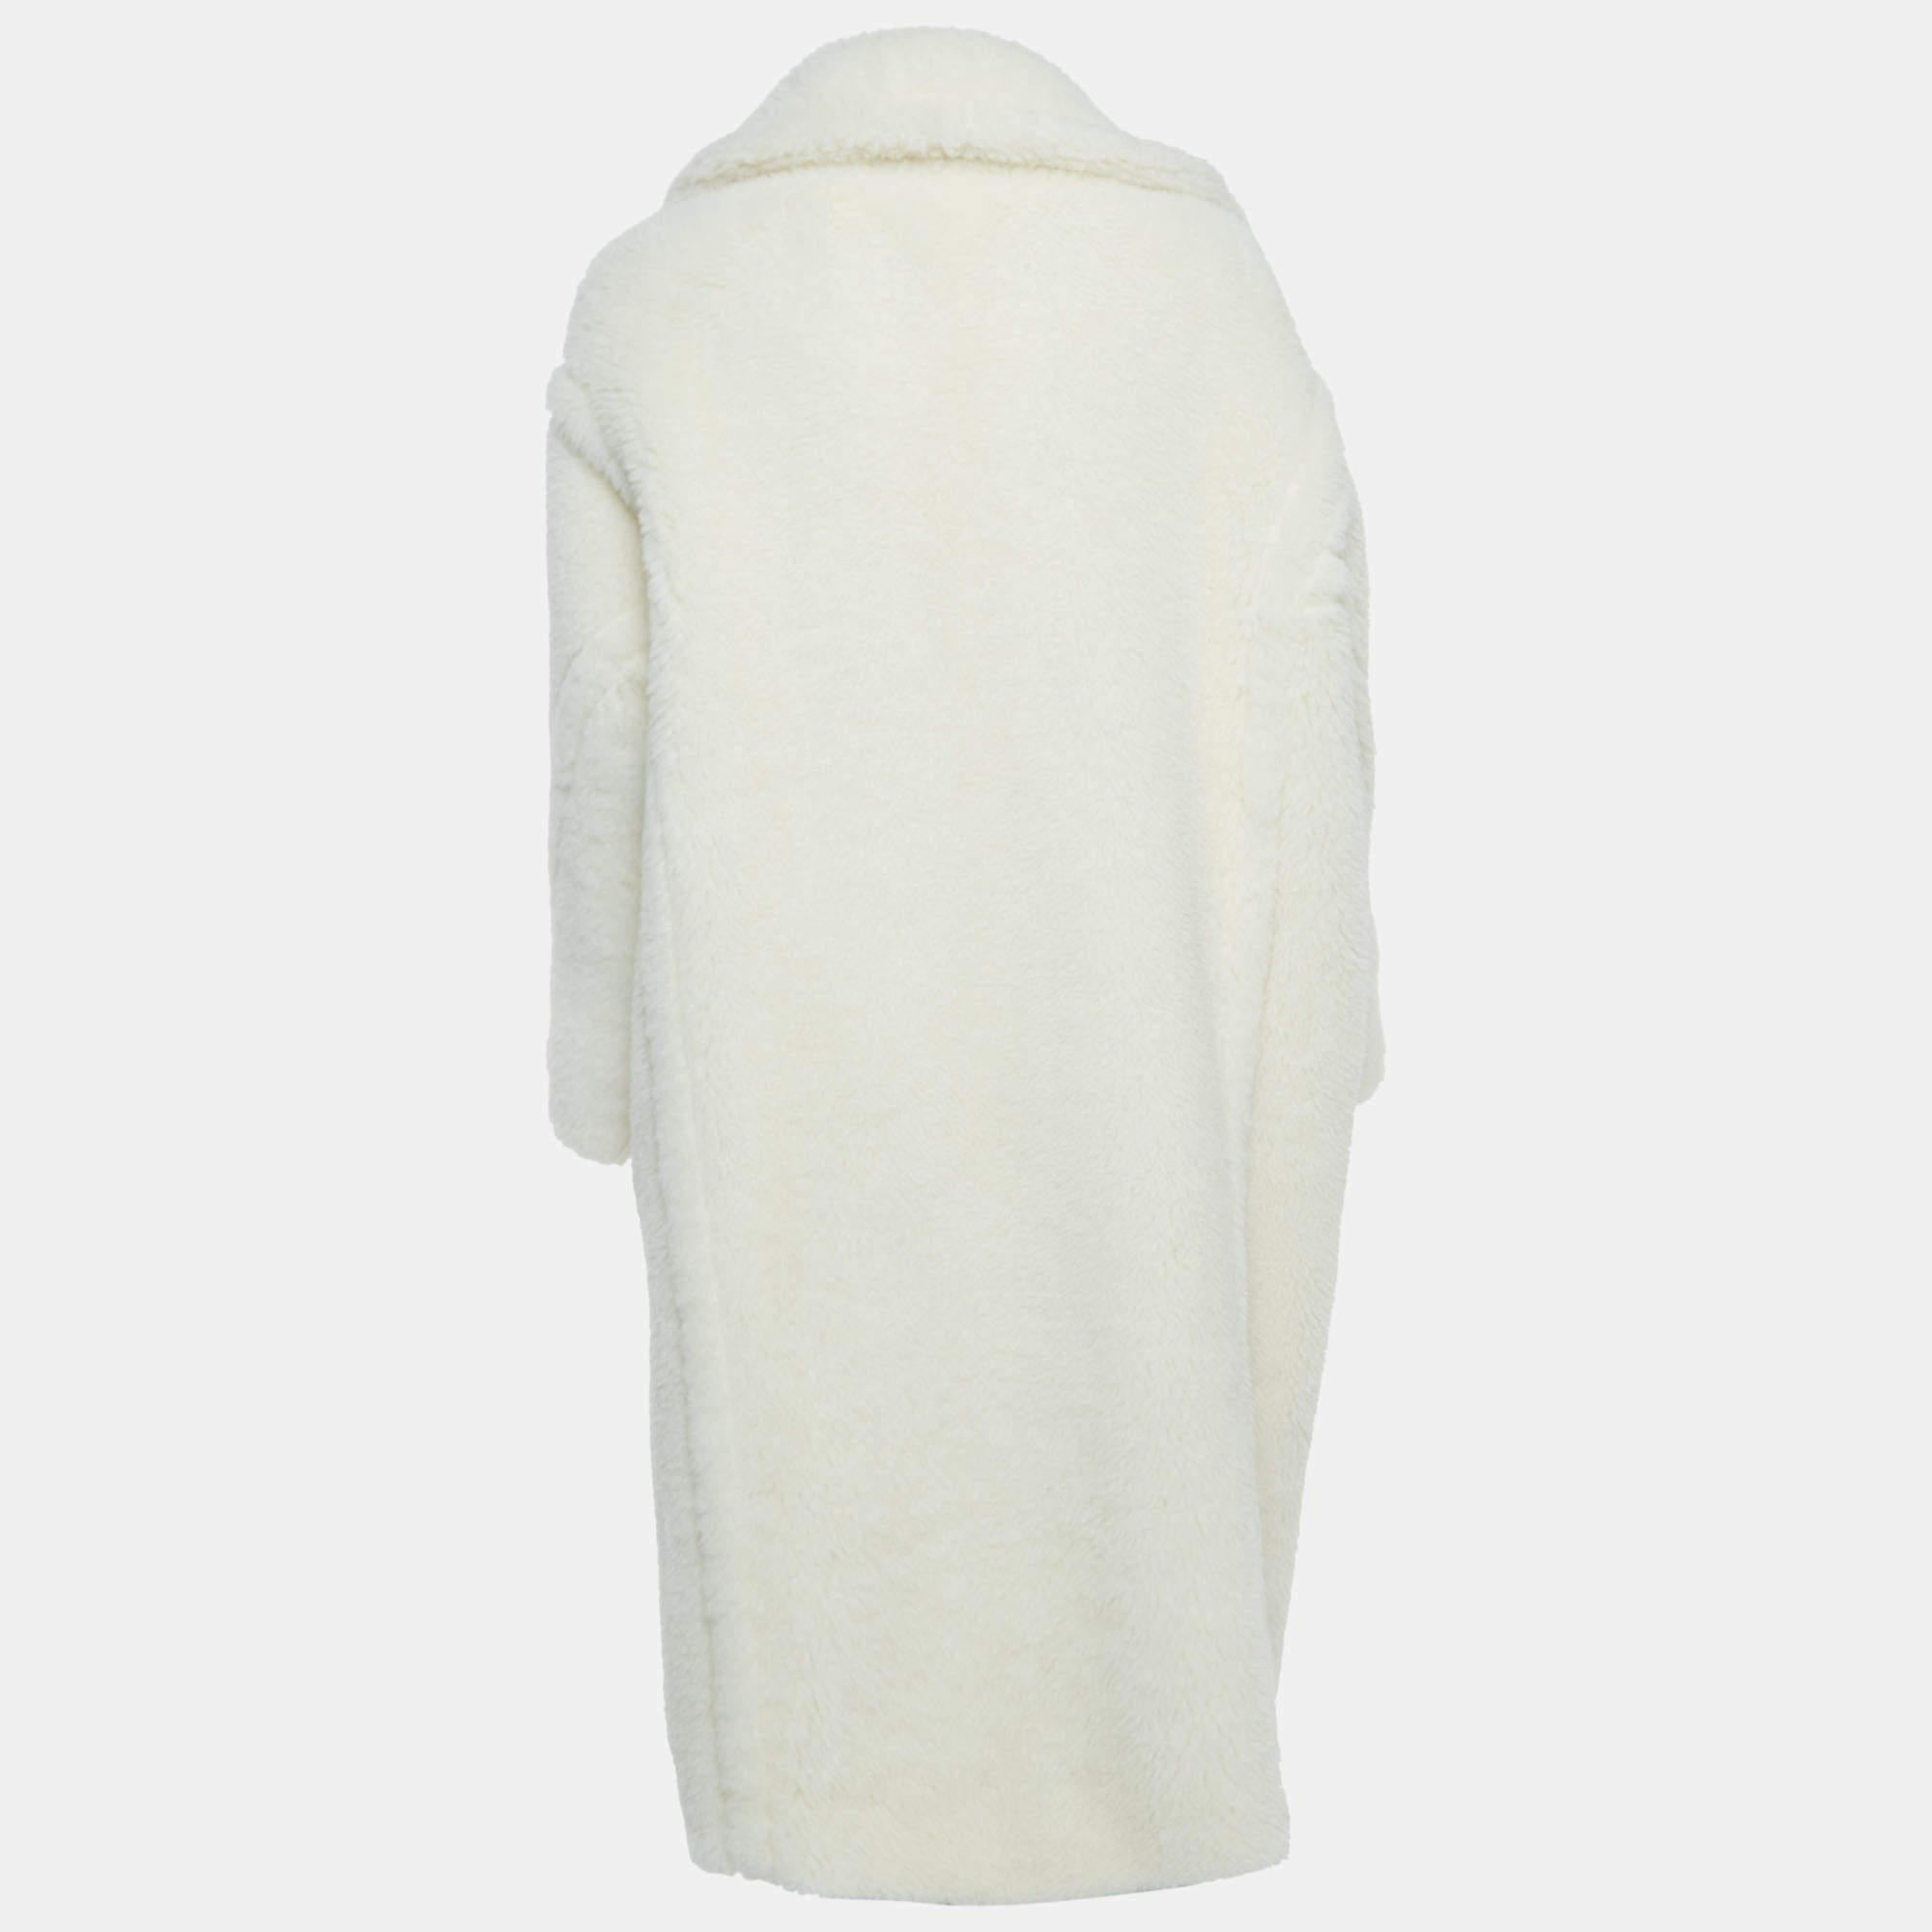 The Max Mara coat exudes timeless elegance. Crafted with sumptuous materials, its plush texture and classic double-breasted design offer a luxurious, sophisticated look. This iconic piece seamlessly combines comfort and style, making it a staple for